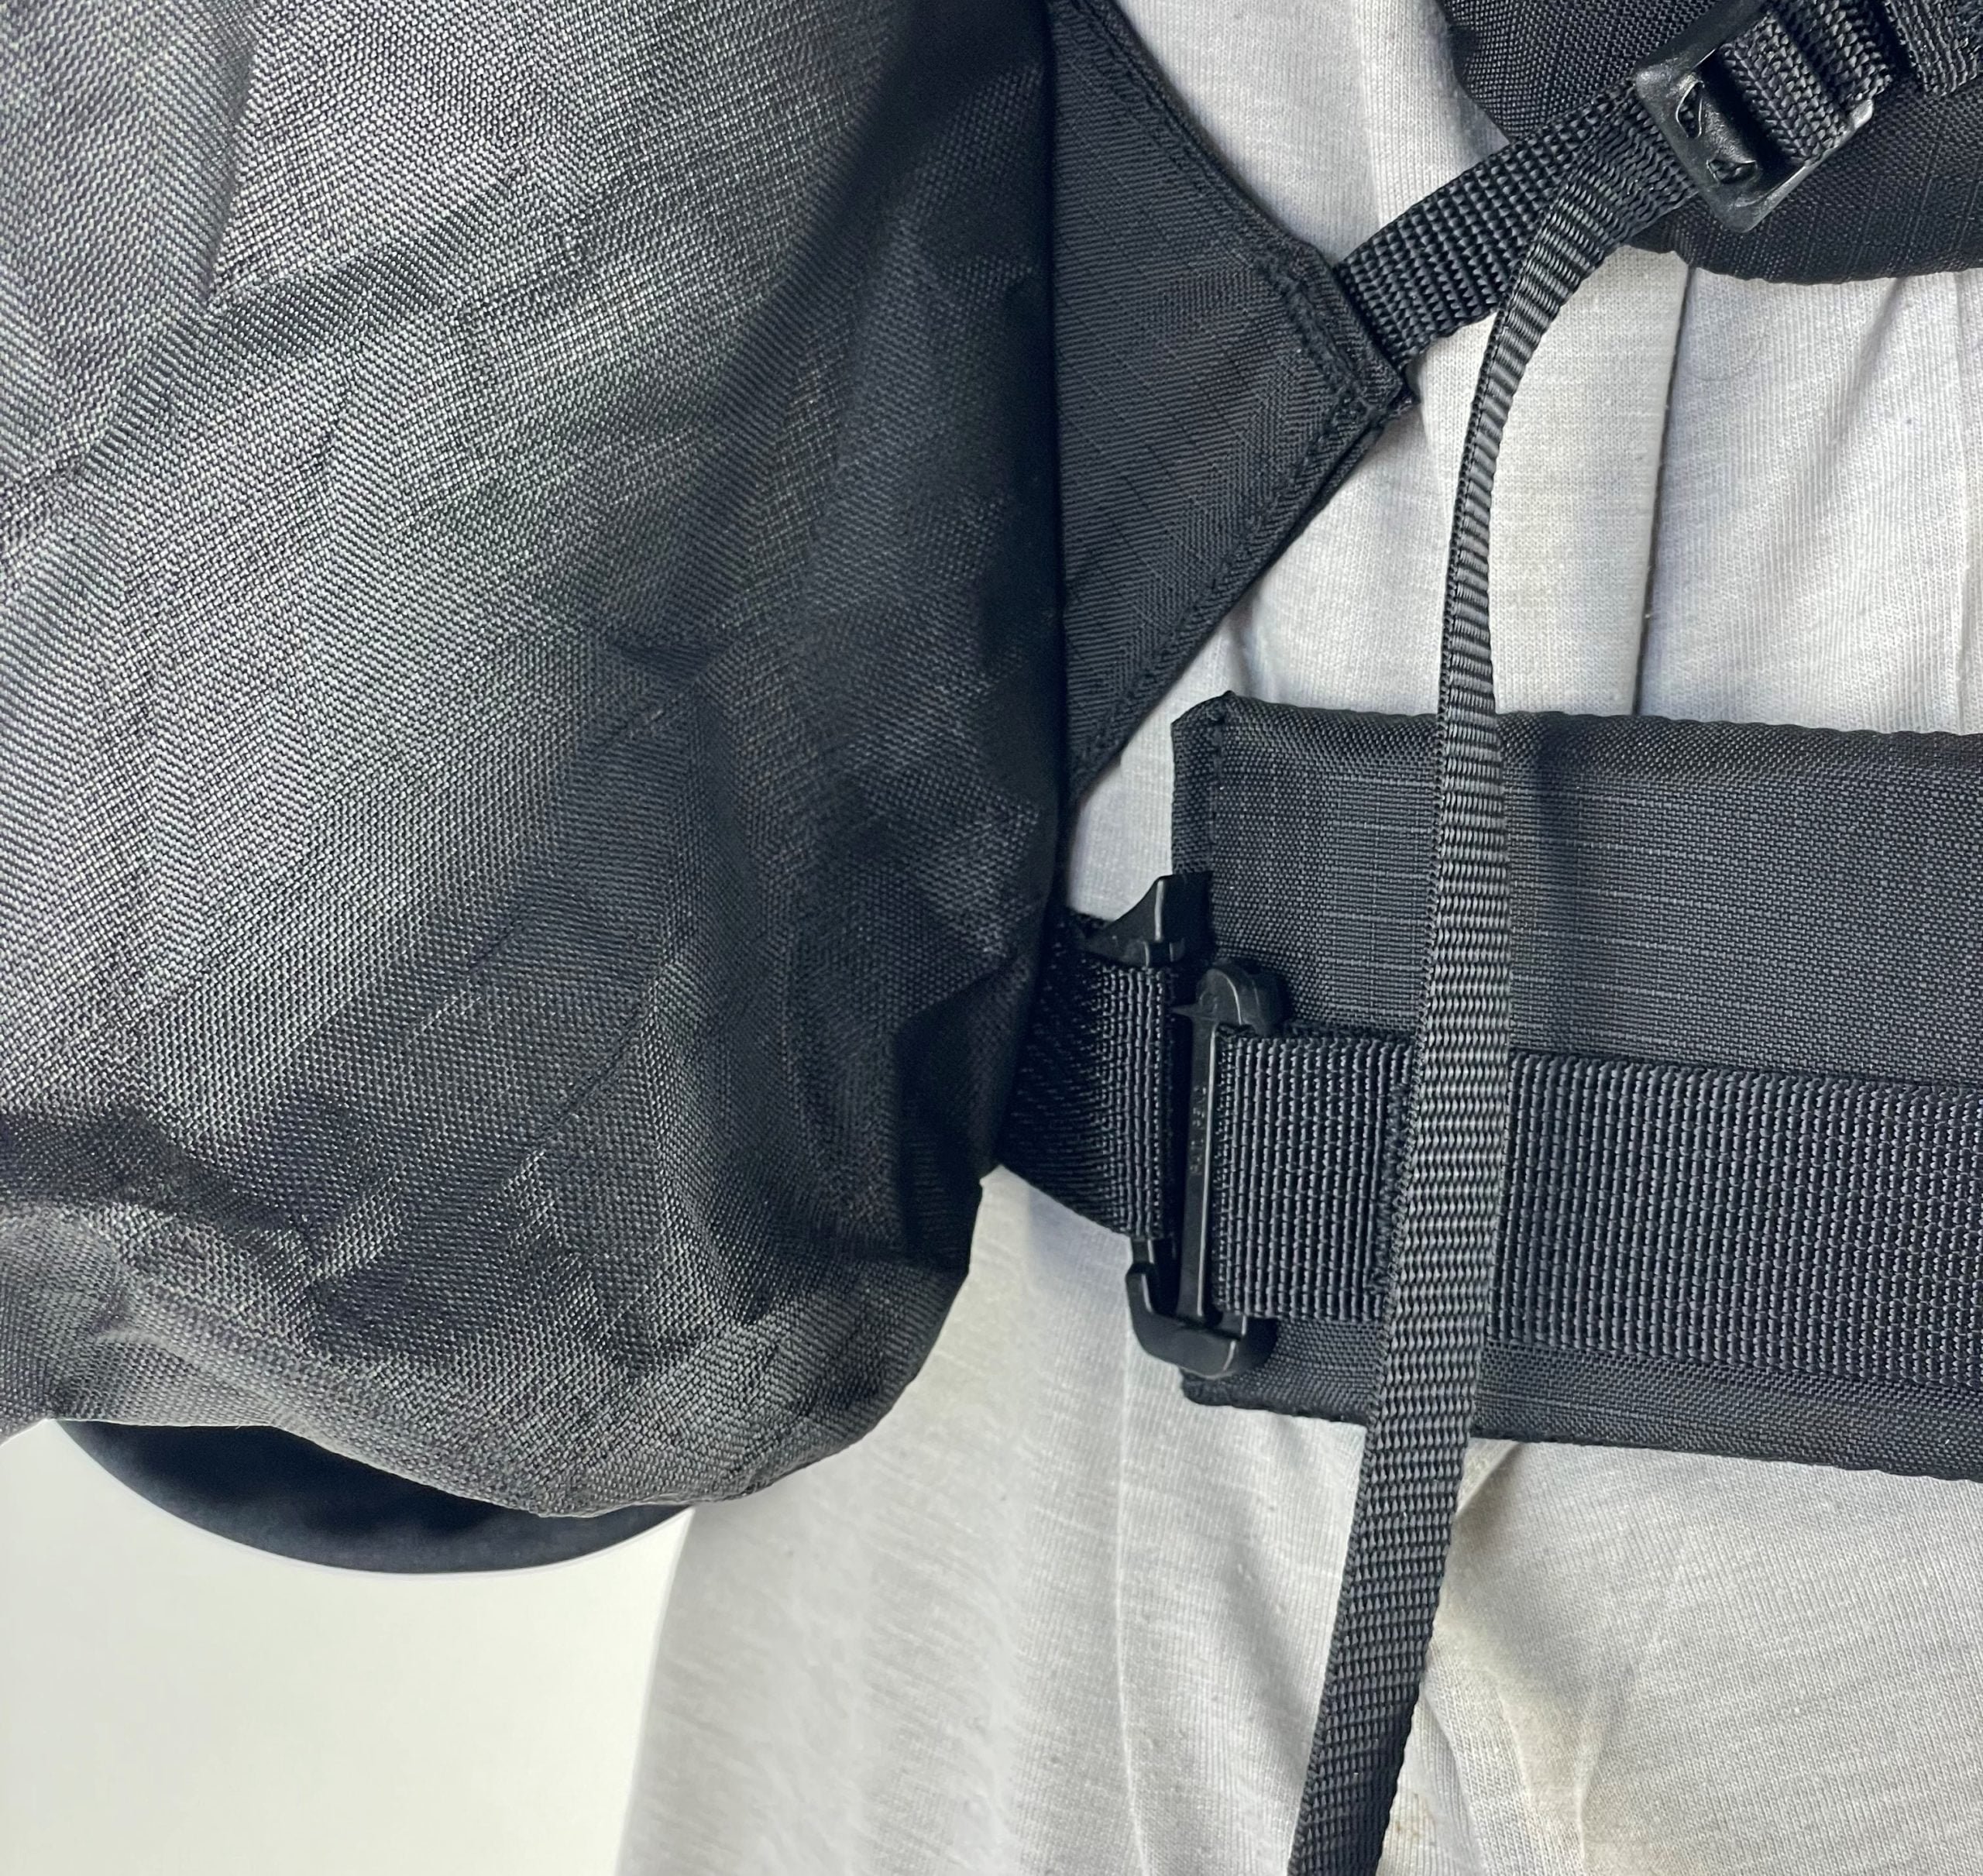 New: Padded Hip Belt for Smart Alec and Synapse Backpacks